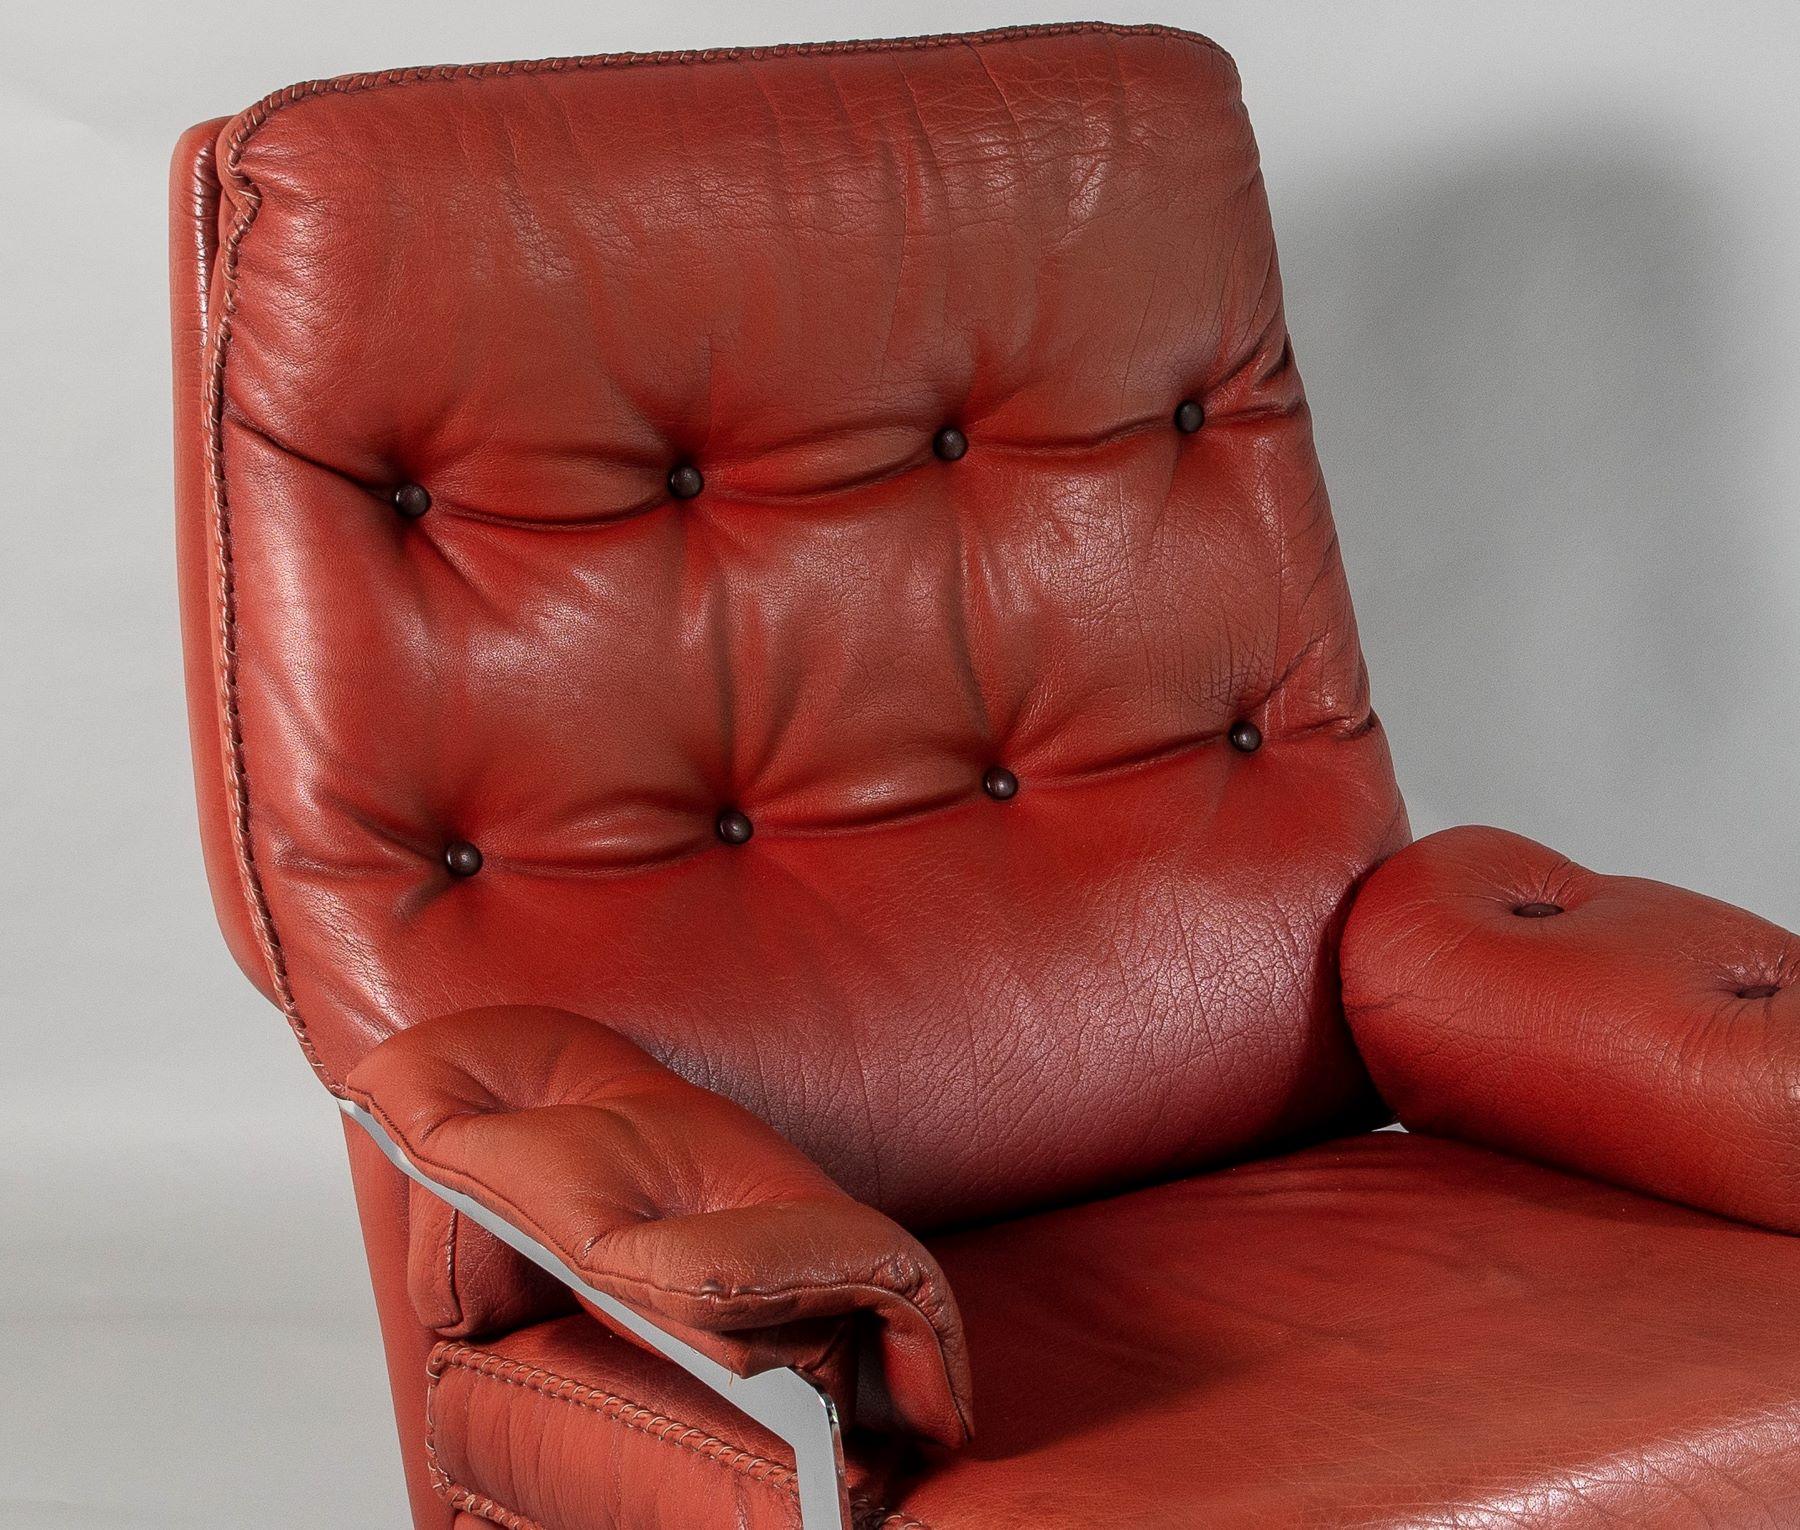 A beautifully made 1960s leather swivel chair. A well crafted piece with heavy chrome base and high quality leather with hand stitching. Originally a dark reddish brown, the leather has faded to this wonderful, almost burnt orange colour which gives